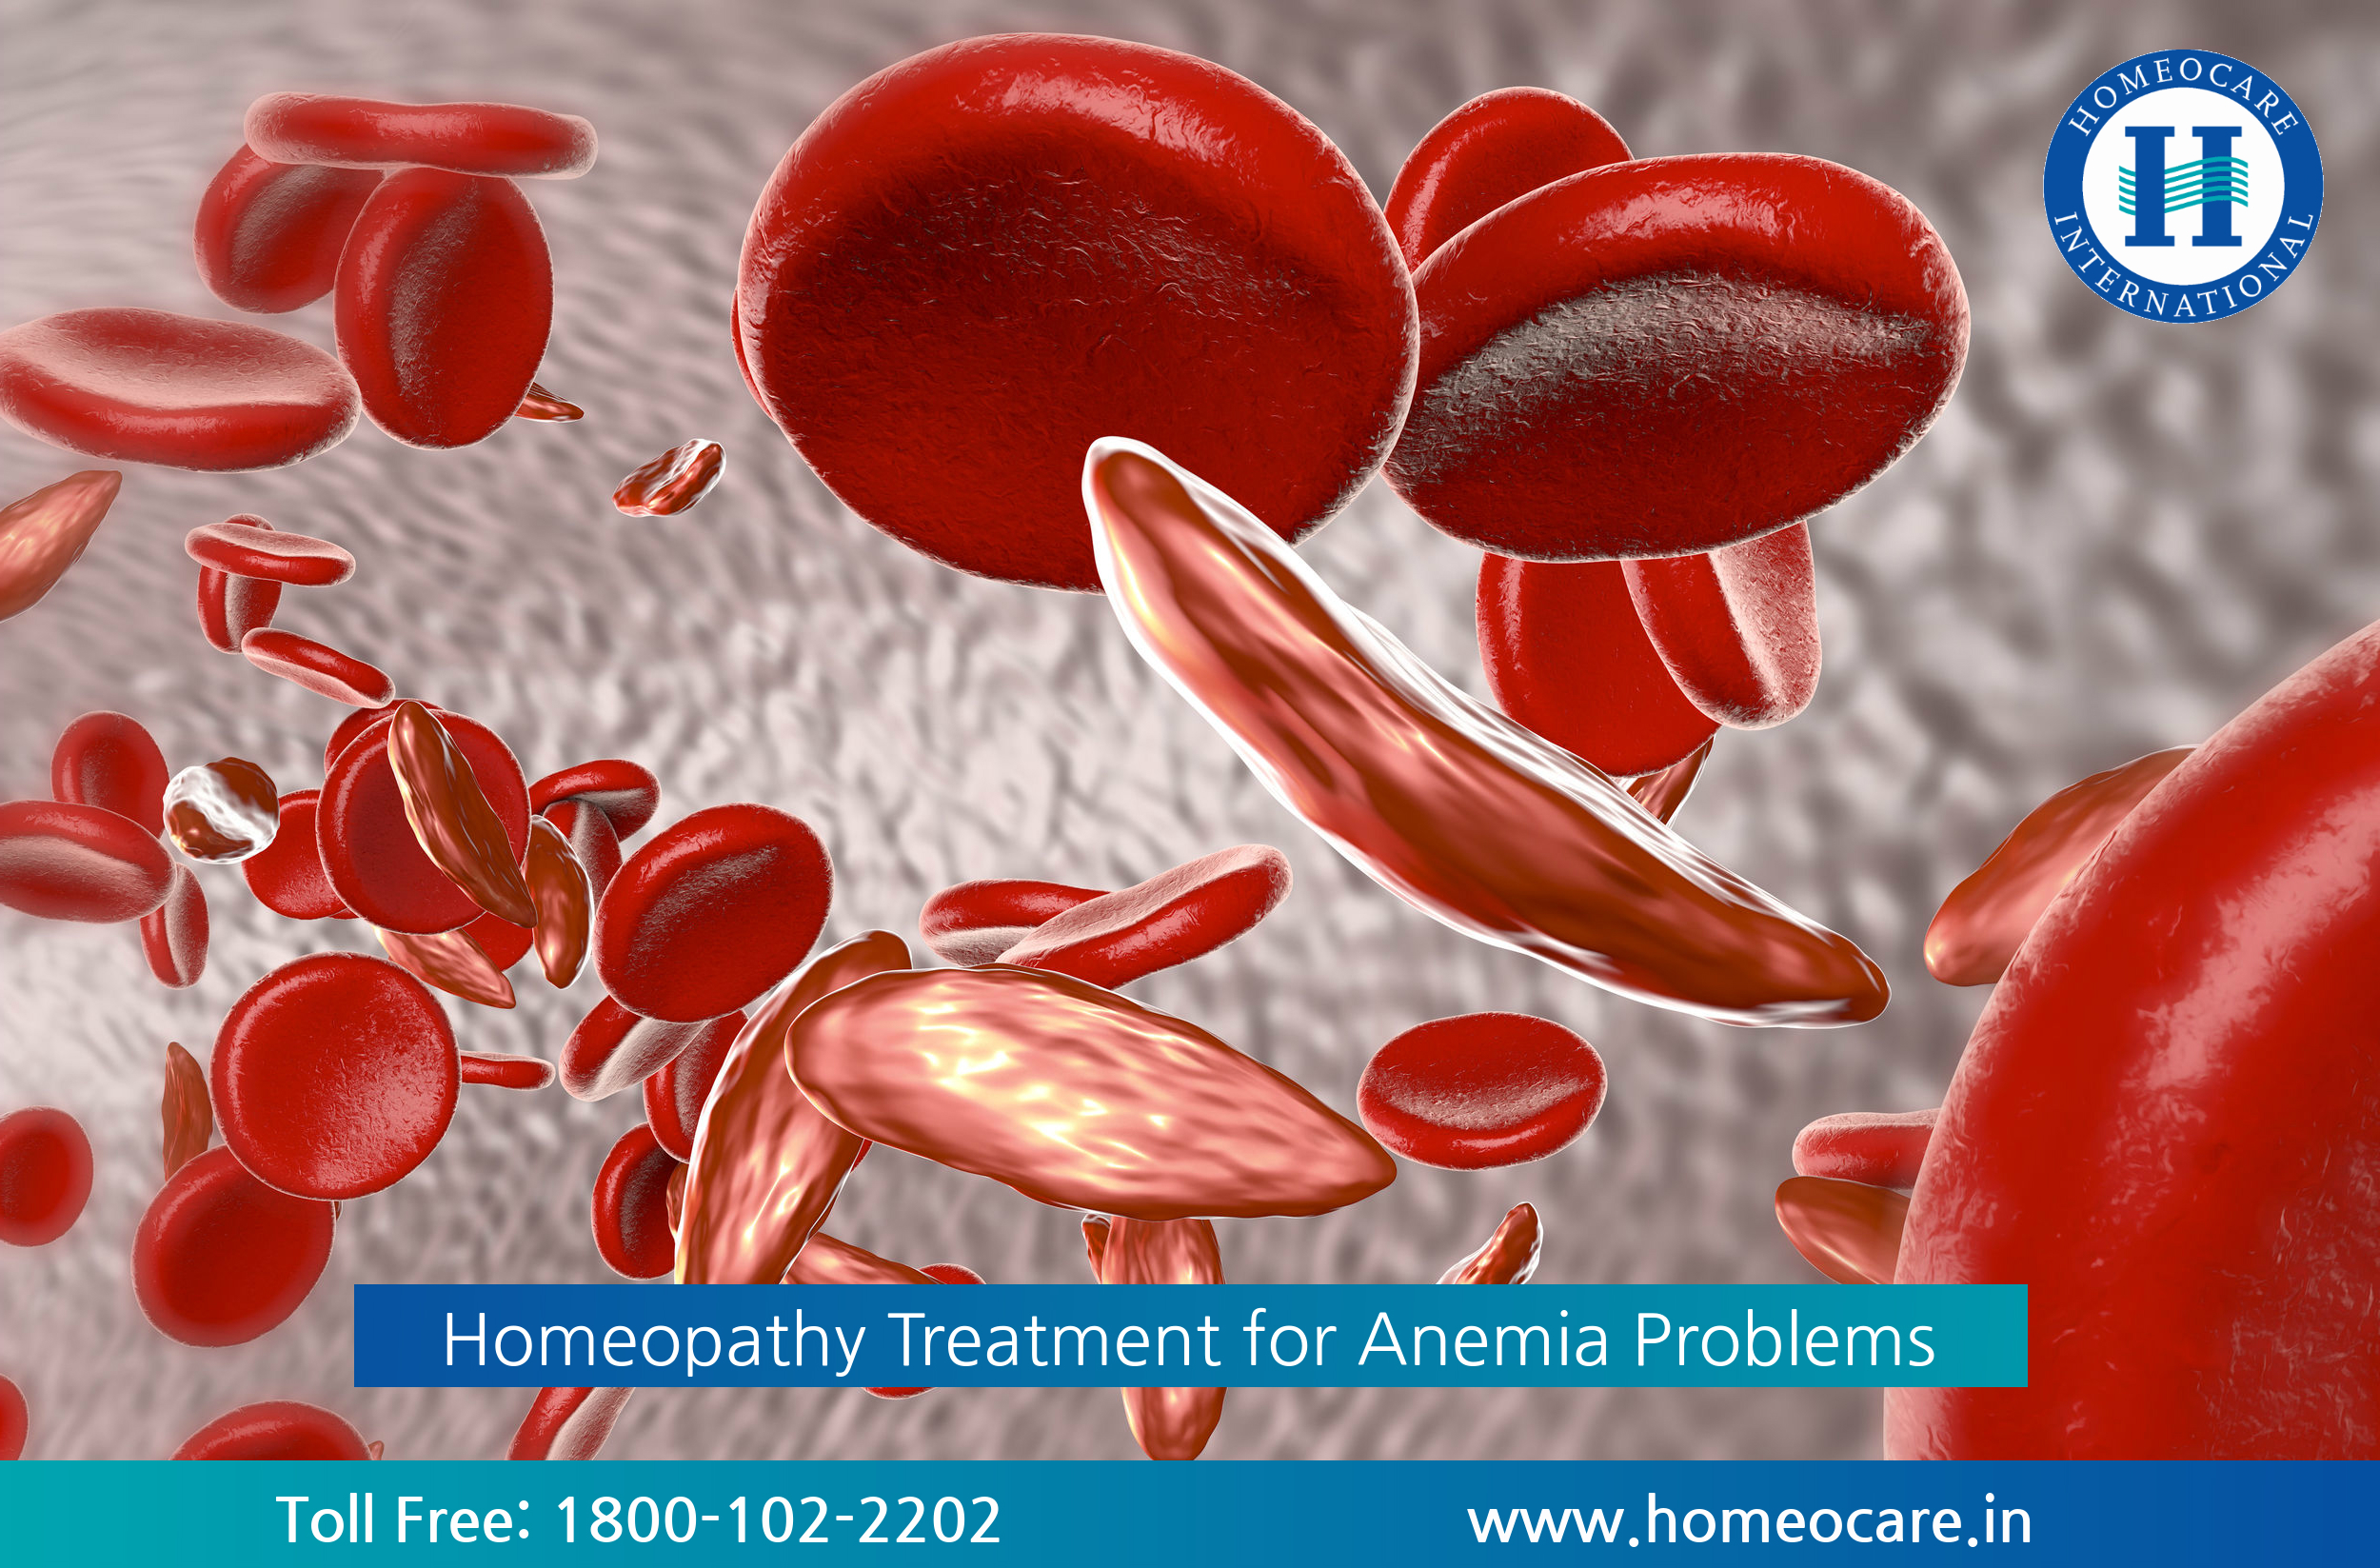 Homeopathy Treatment for Anemia Problems